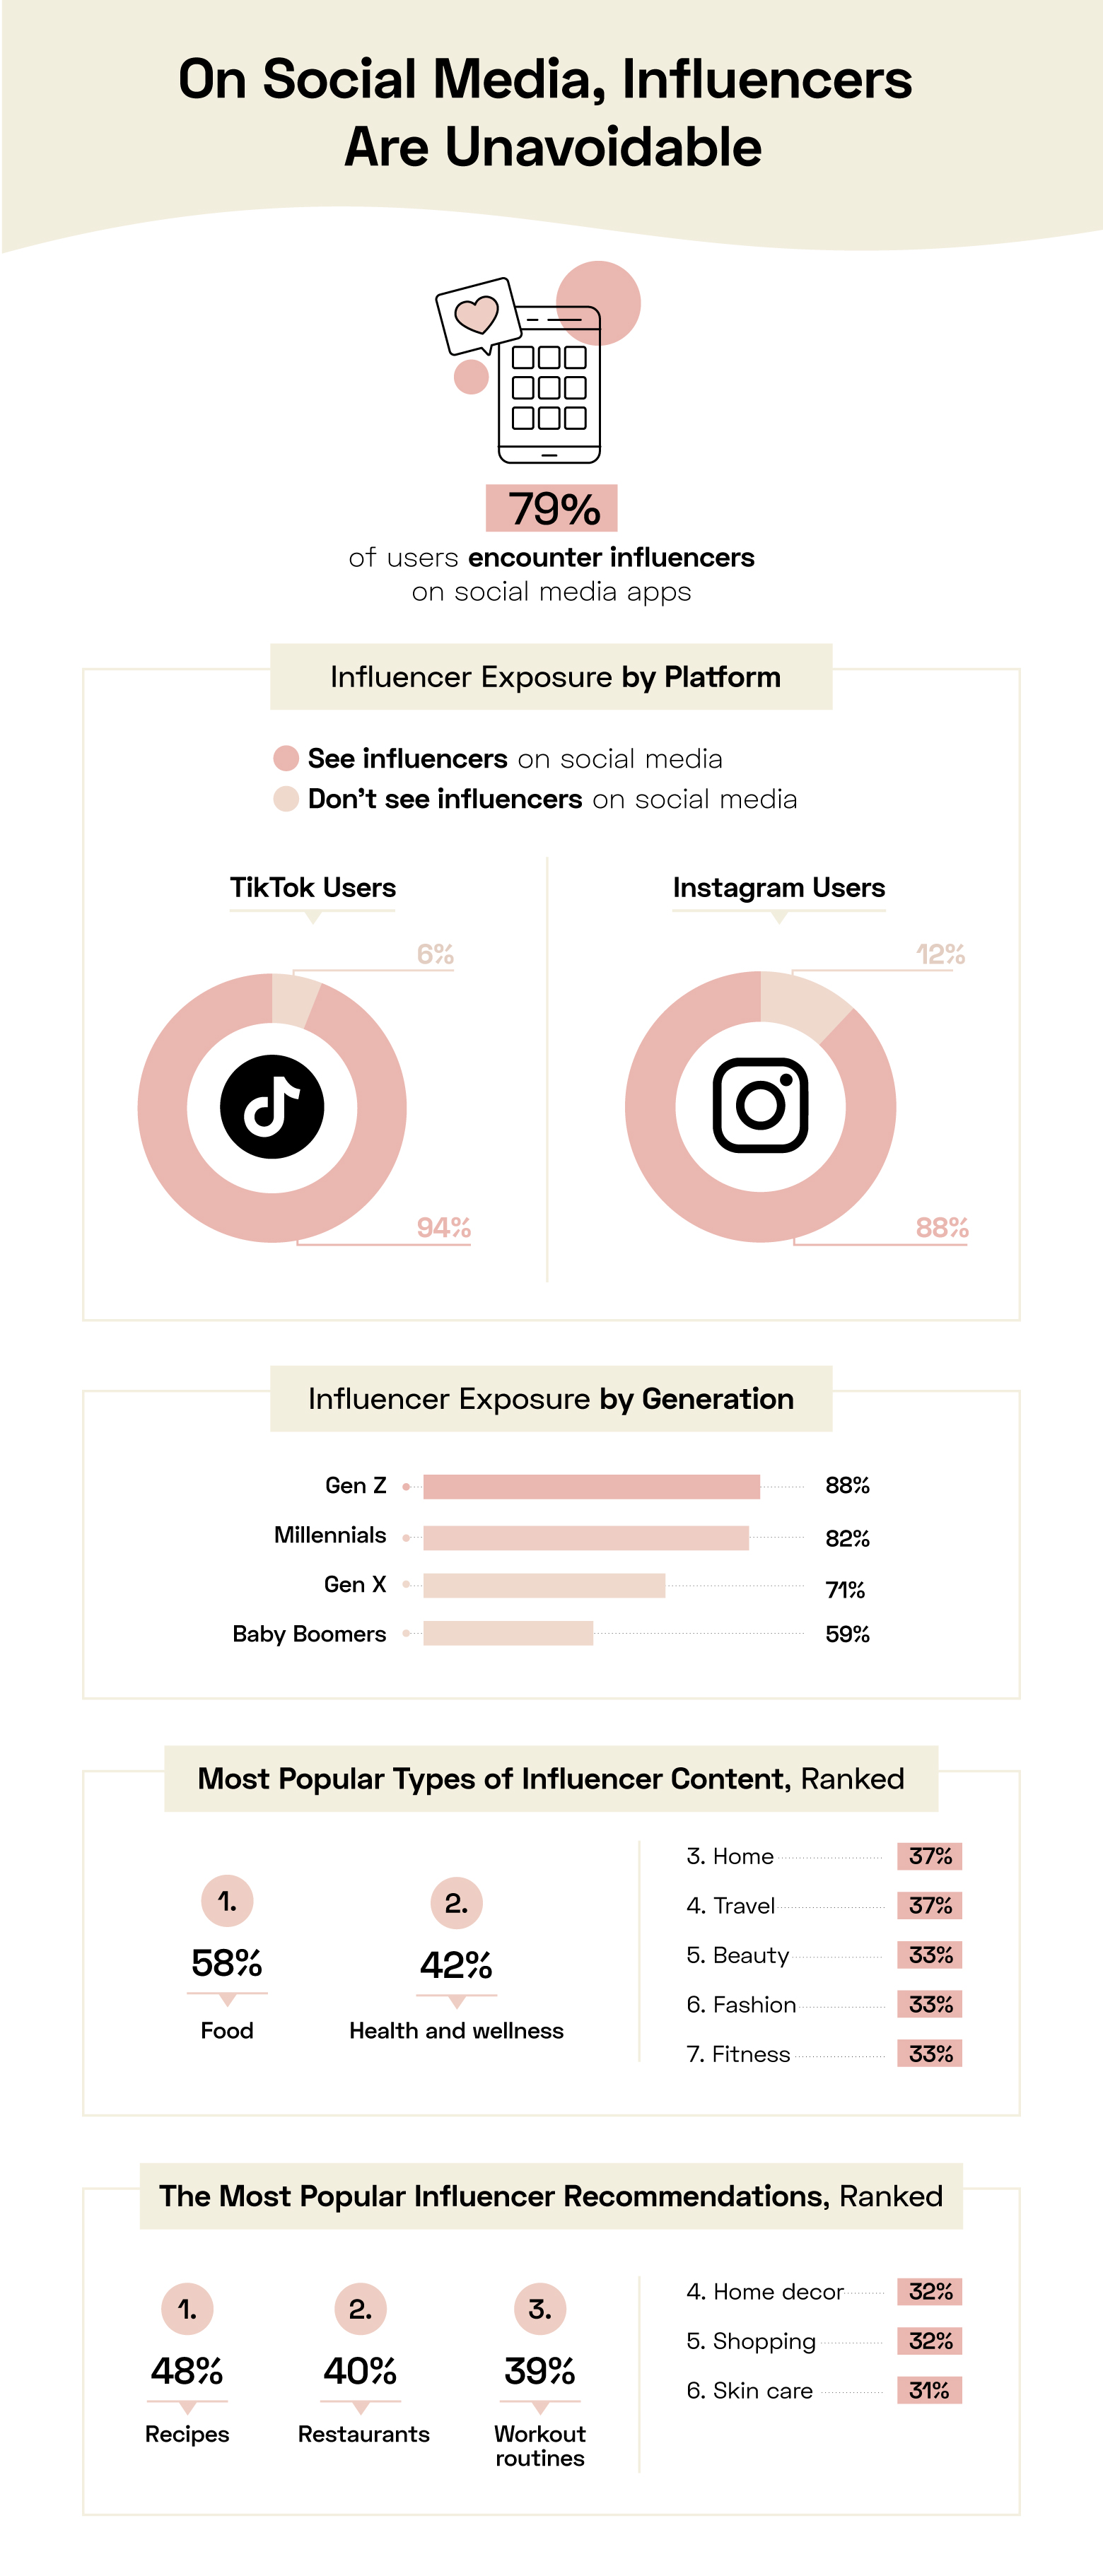 most social media users encounter influencers online